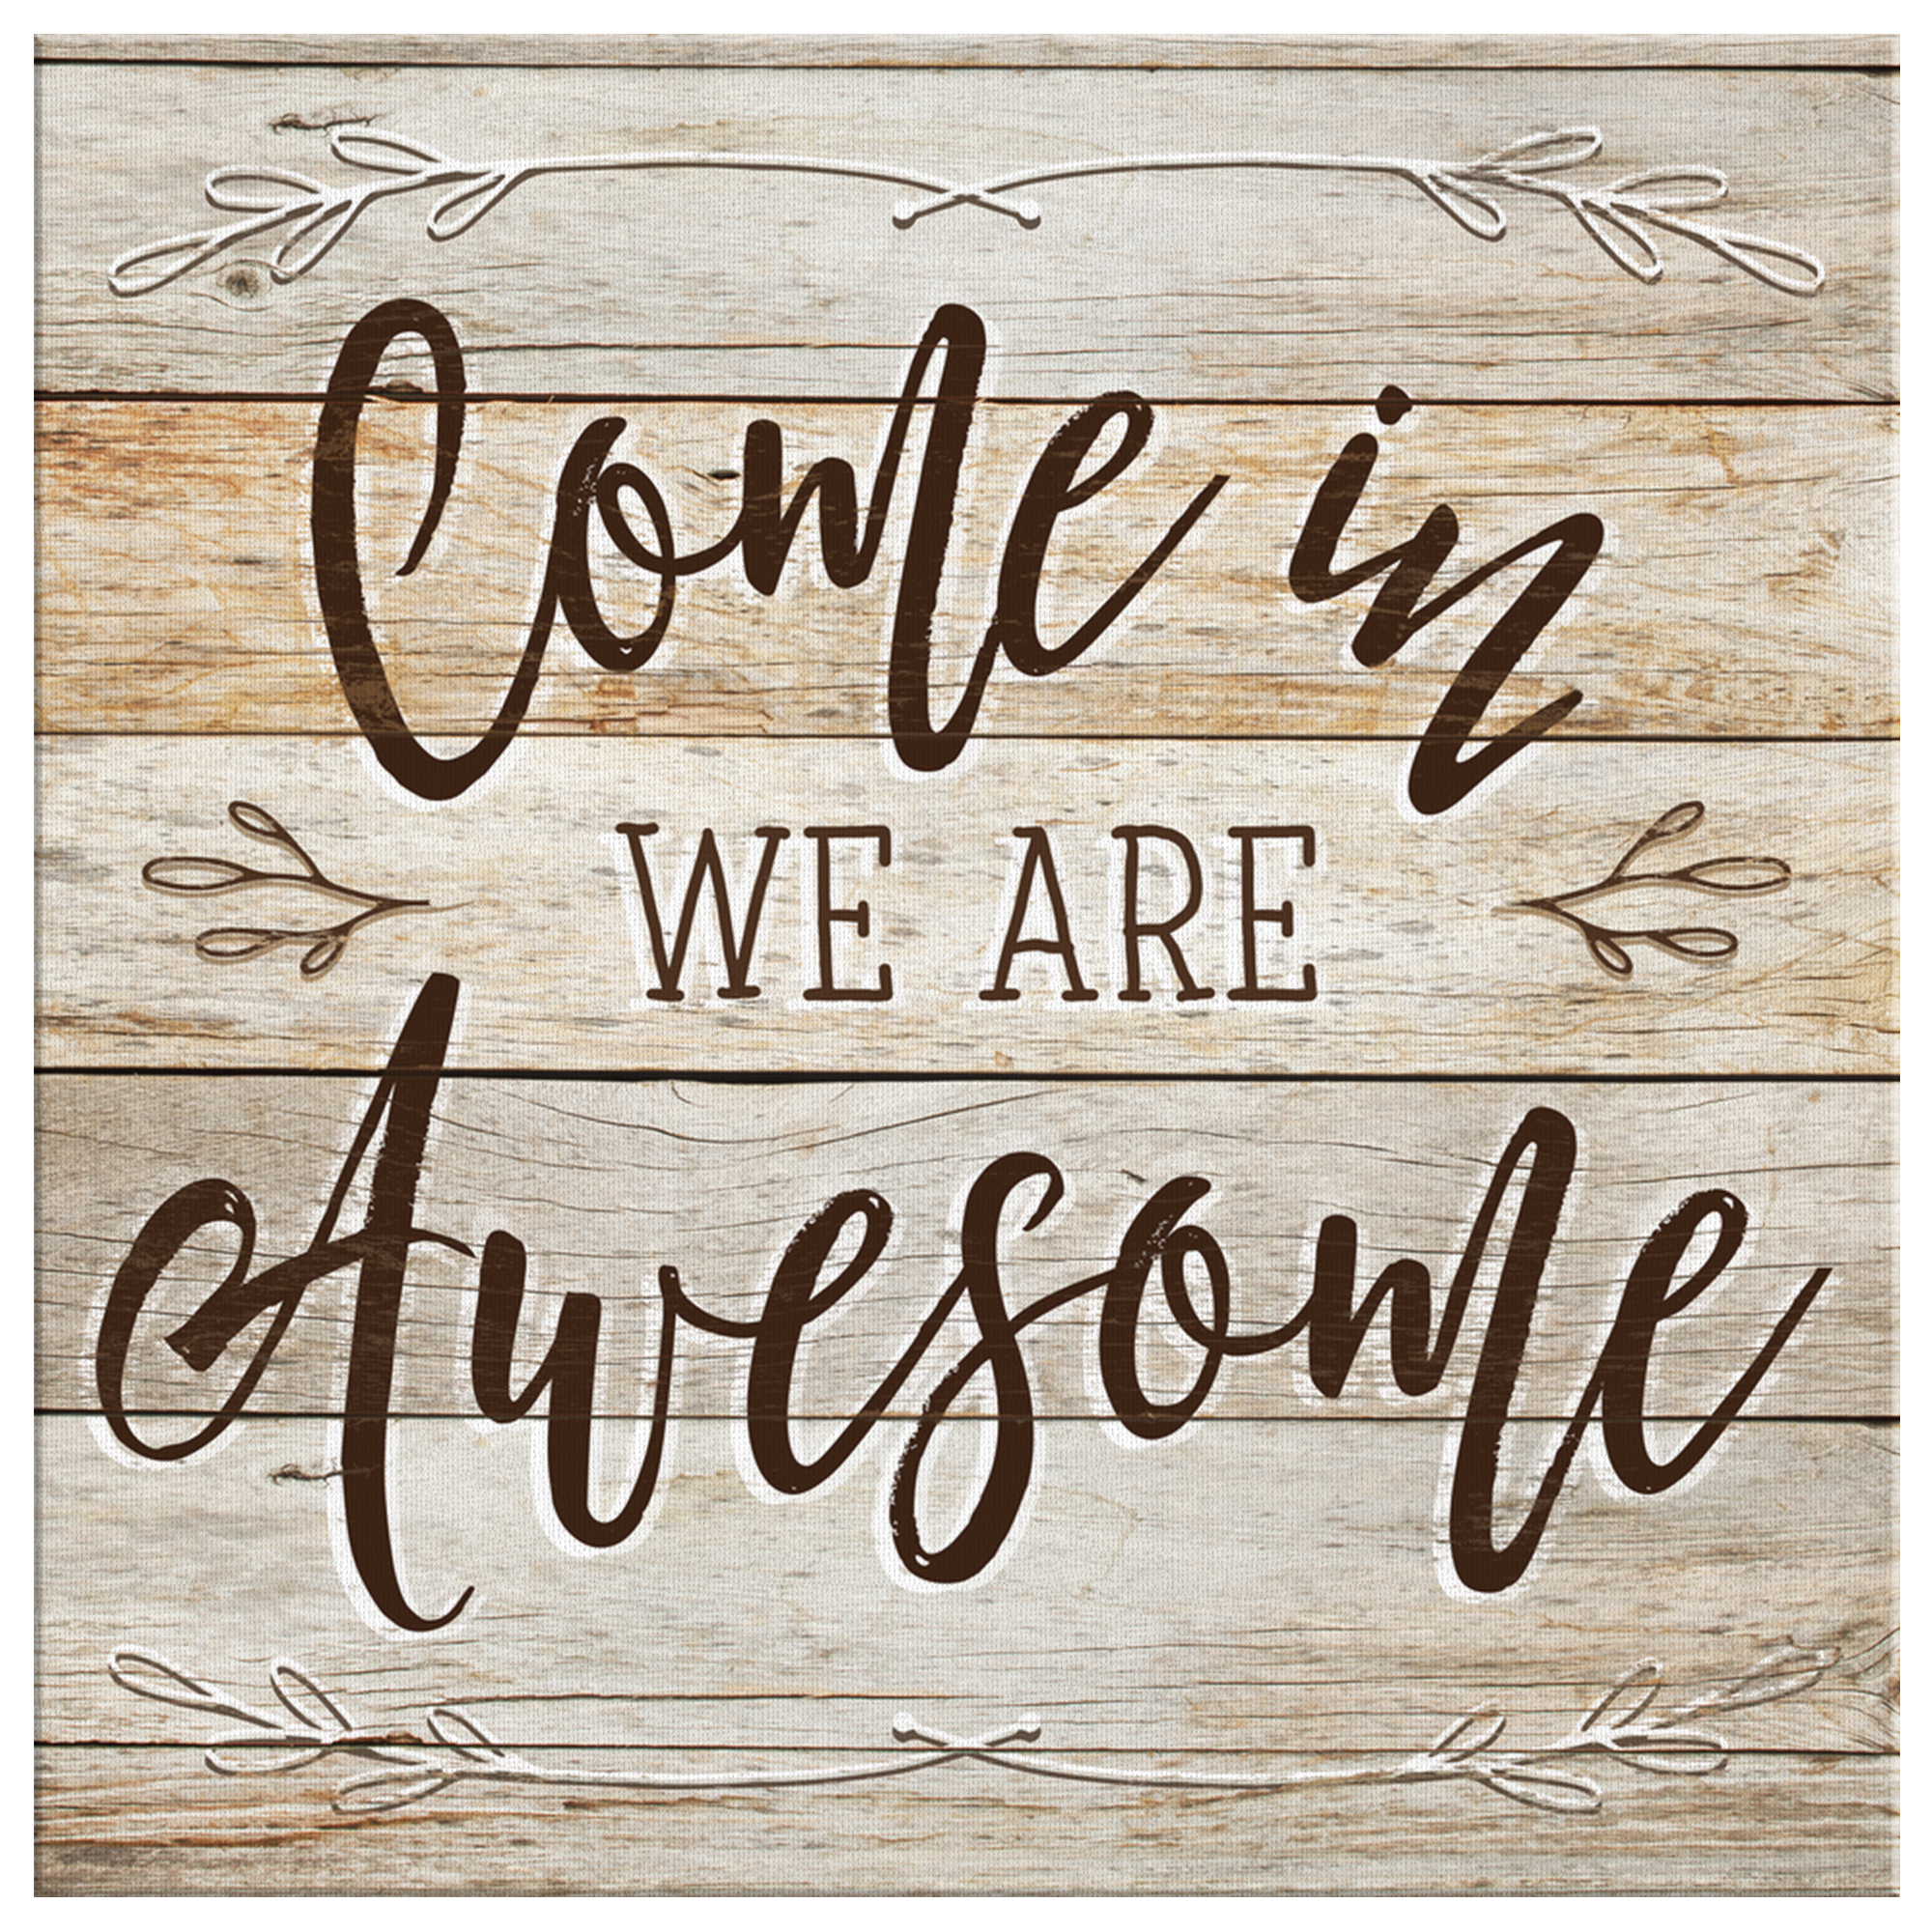 "Come In - We Are Awesome" Premium Rustic Canvas Wall Art